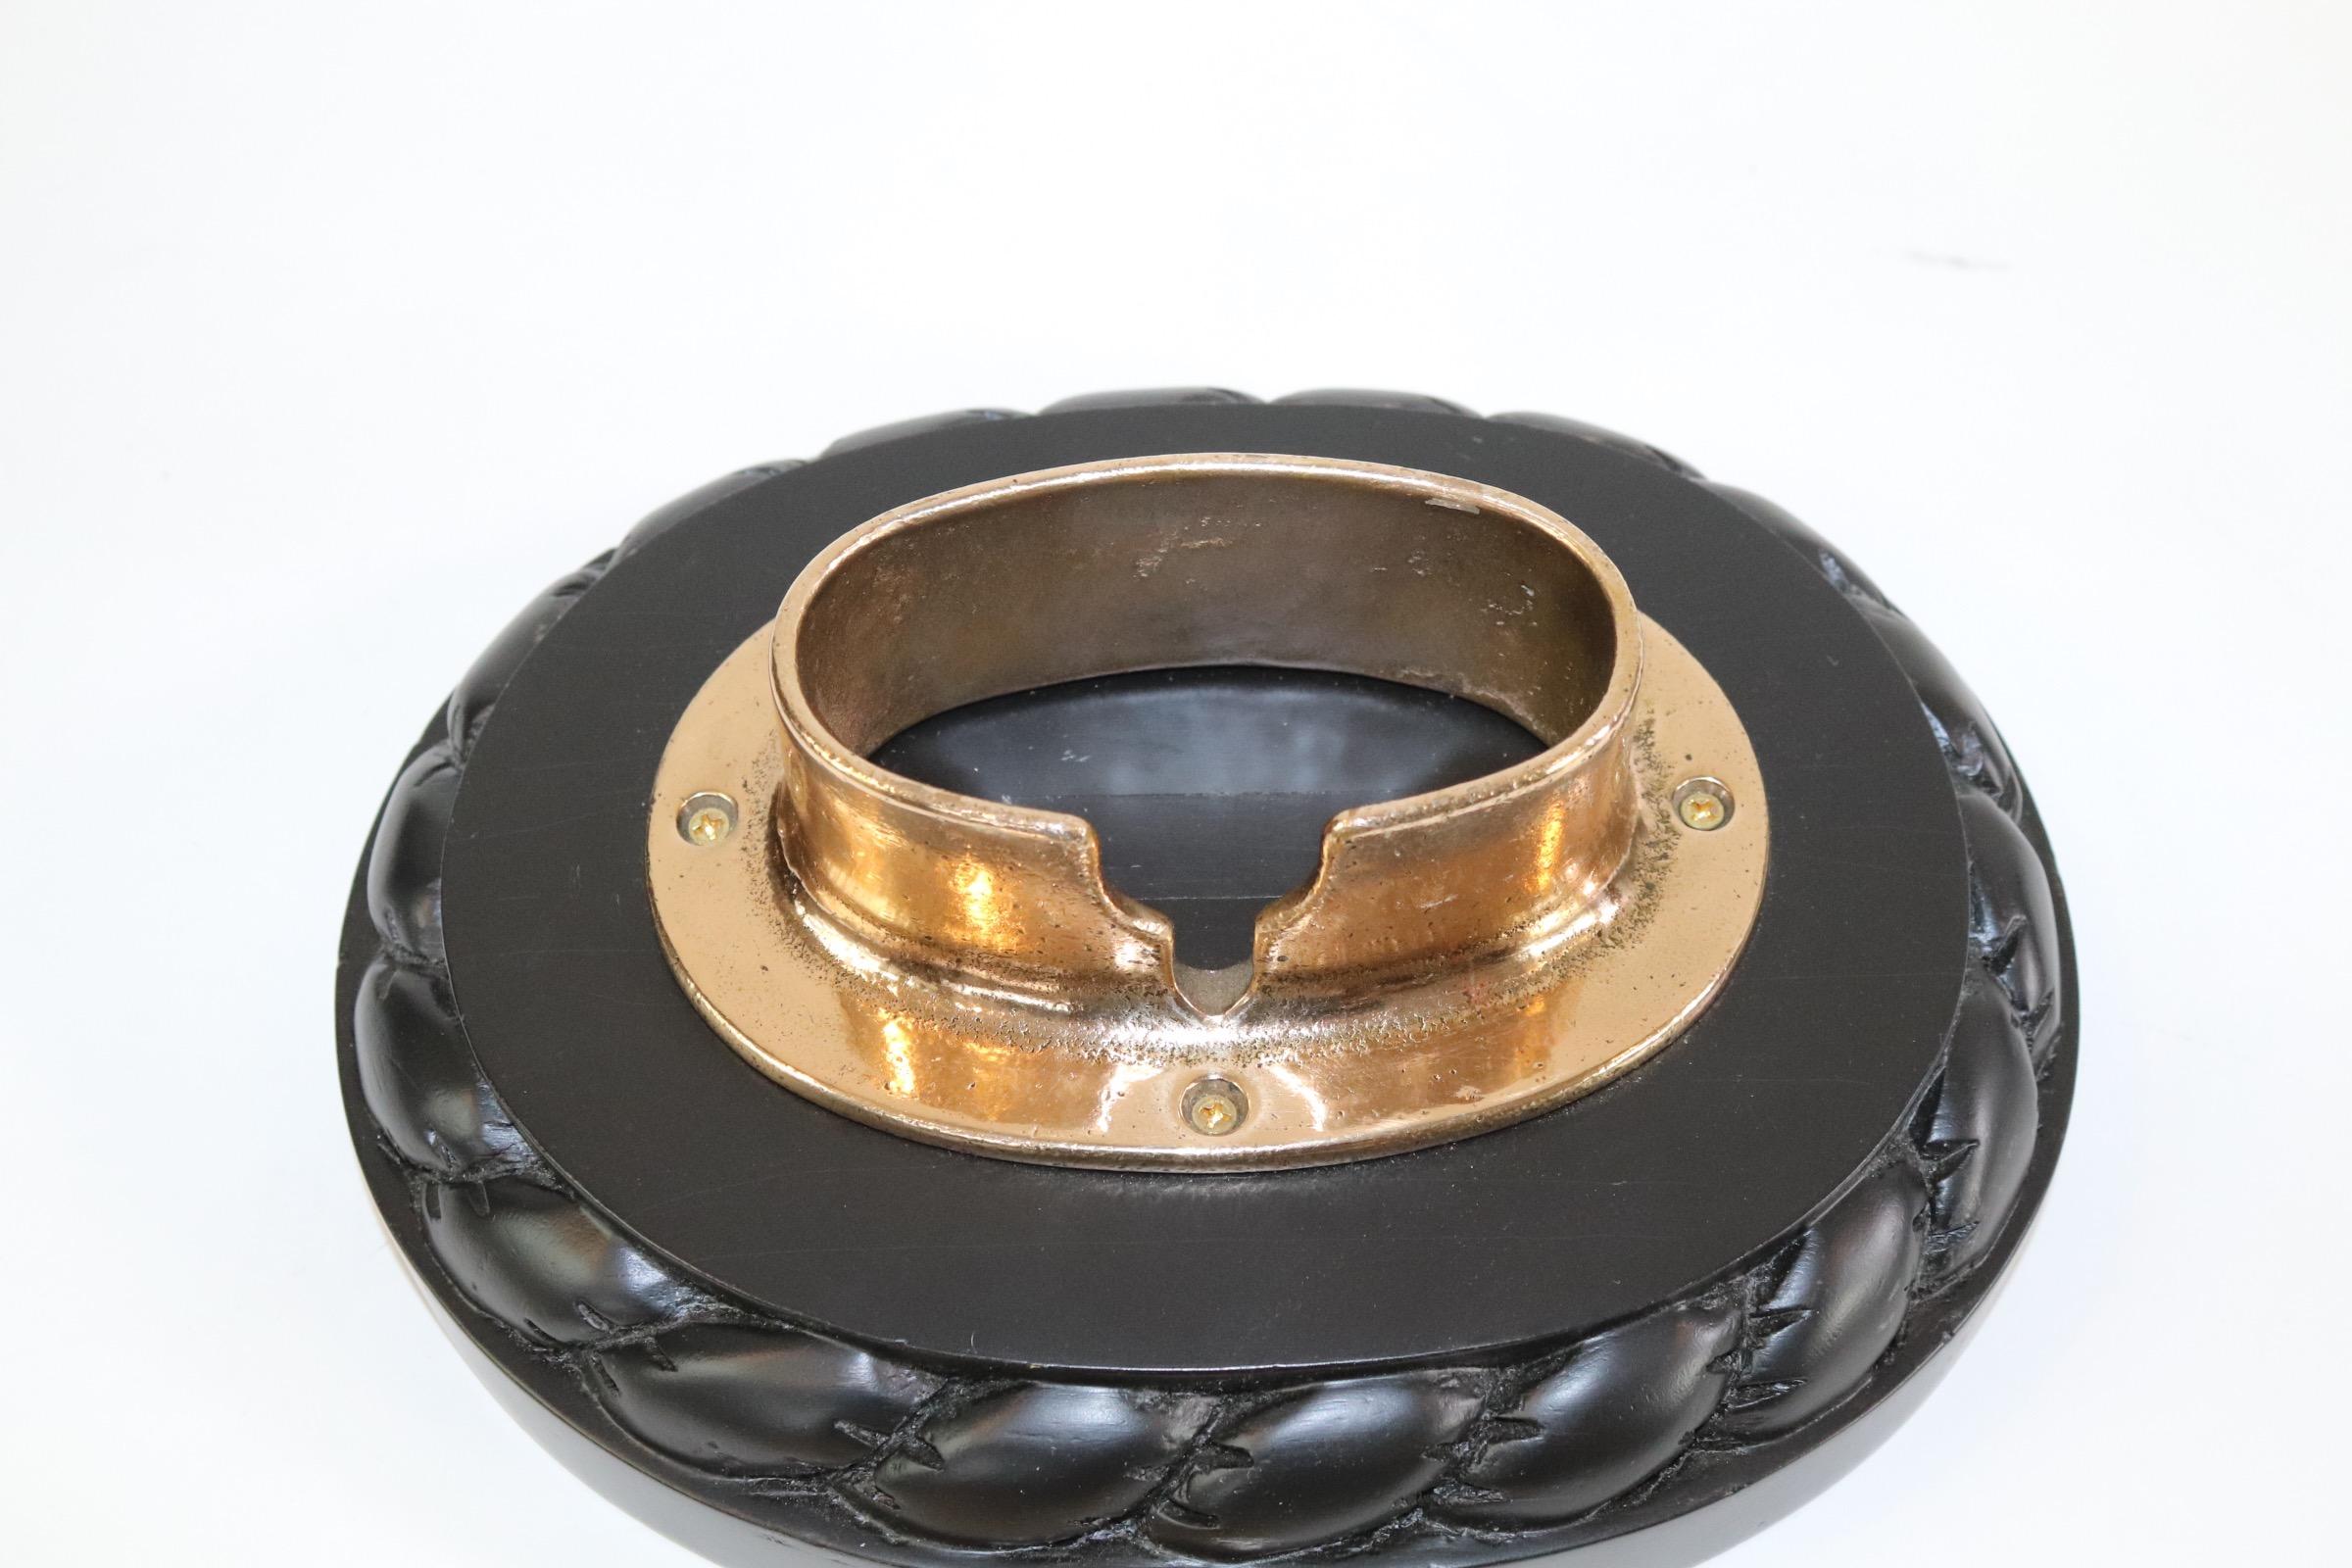 Polished and lacquered solid brass chain housing deck feed with cover. Company hallmark inside lid. Mounted to a thick wood base with carved rope border. Weight is 6 pounds.